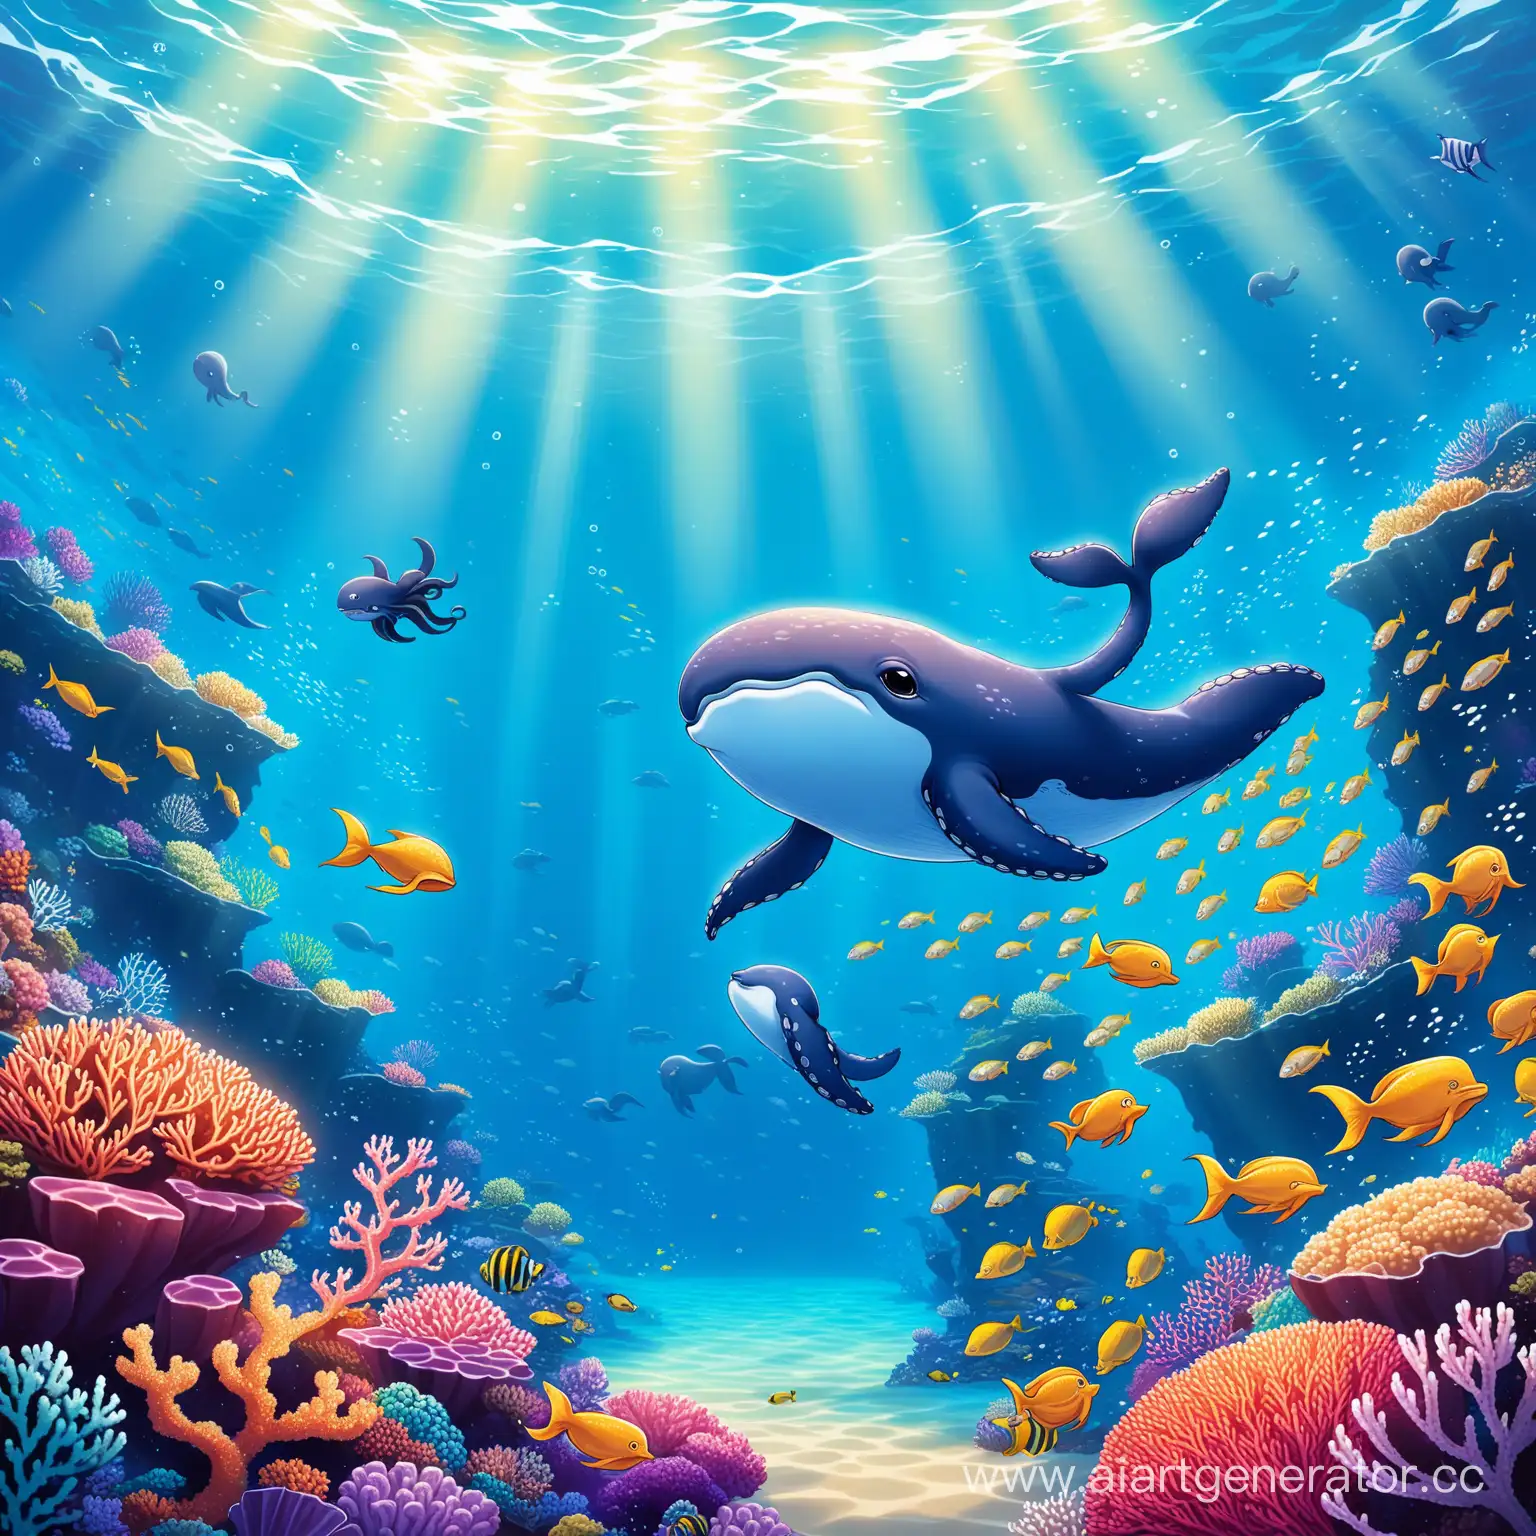 Whale-Conversing-with-Octopus-in-Vibrant-Underwater-Coral-Reef-Scene